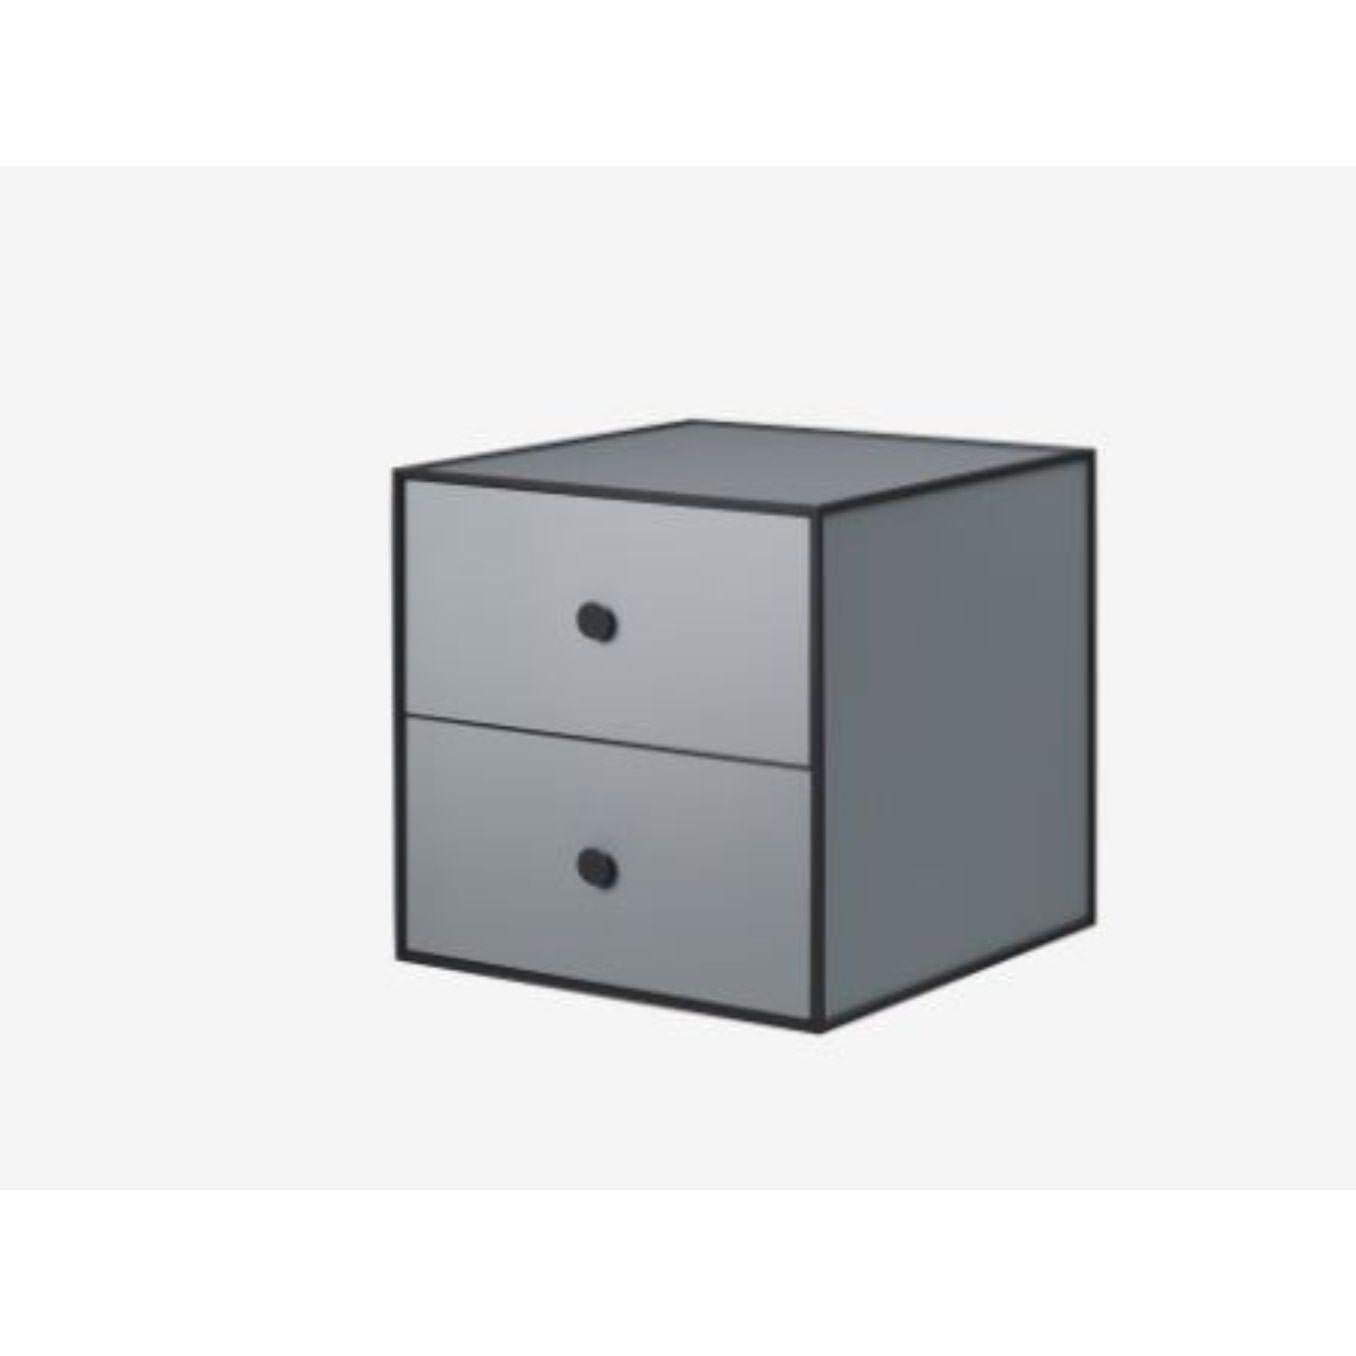 35 dark grey frame box with 2 drawer by Lassen
Dimensions: W 35 x D 35 x H 35 cm 
Materials: Finér, Melamin, Melamin, Melamine, Metal, Veneer,
Also available in different colors and dimensions. 
Weight: 10.50, 10.50, 11.50, 11.50 Kg

Frame